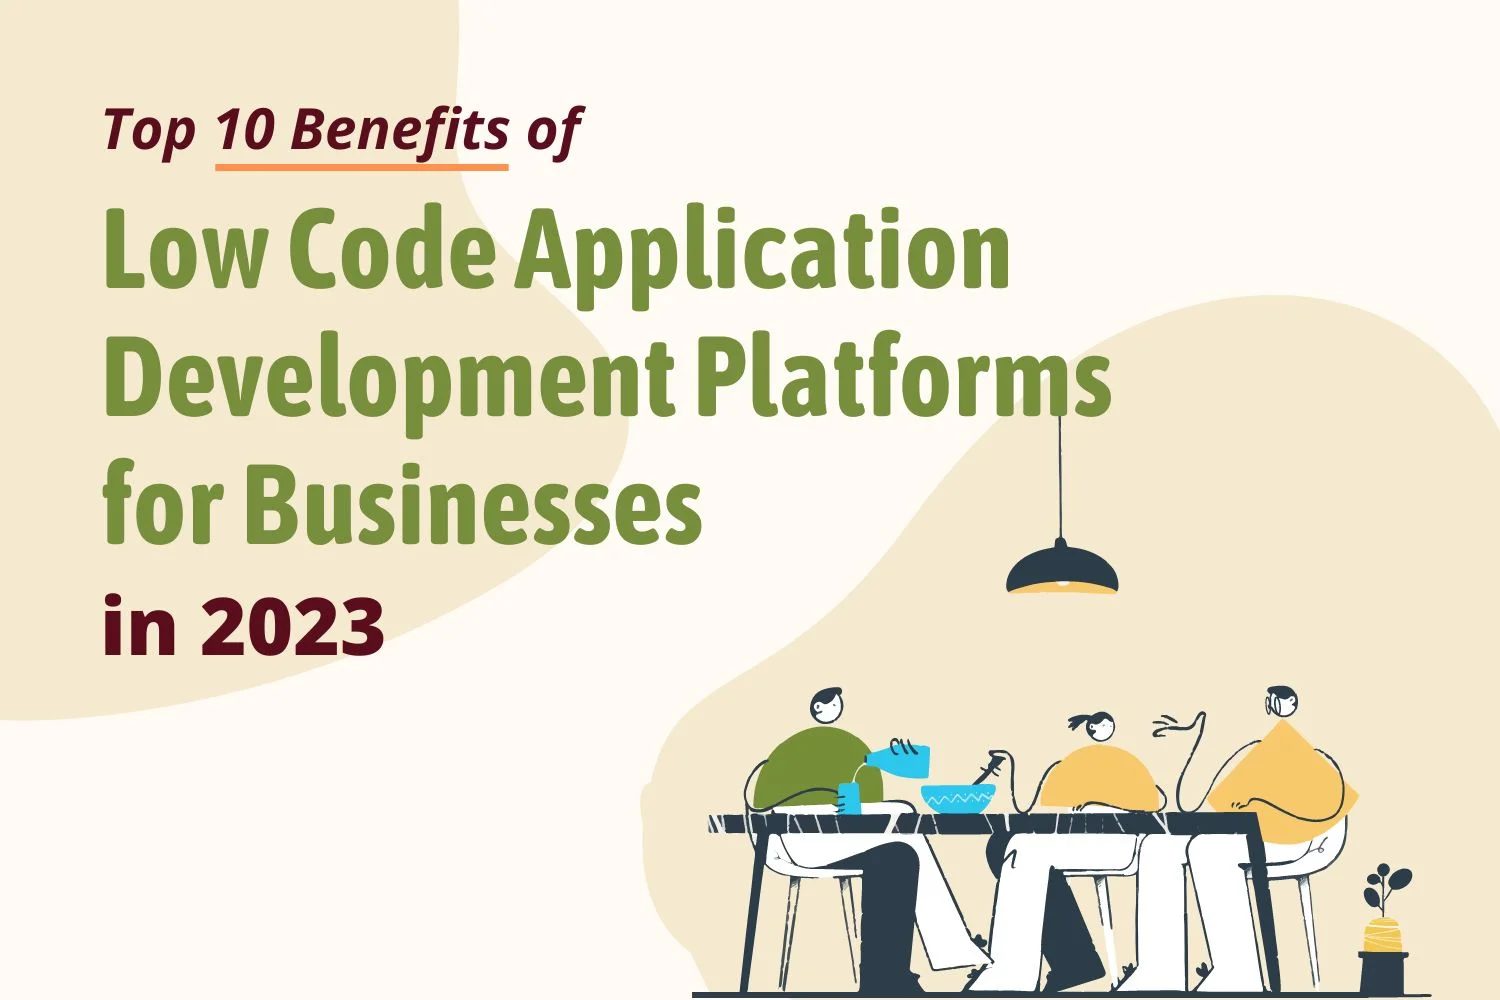 Top 10 Benefits of Low Code Application Development Platforms for Businesses in 2023